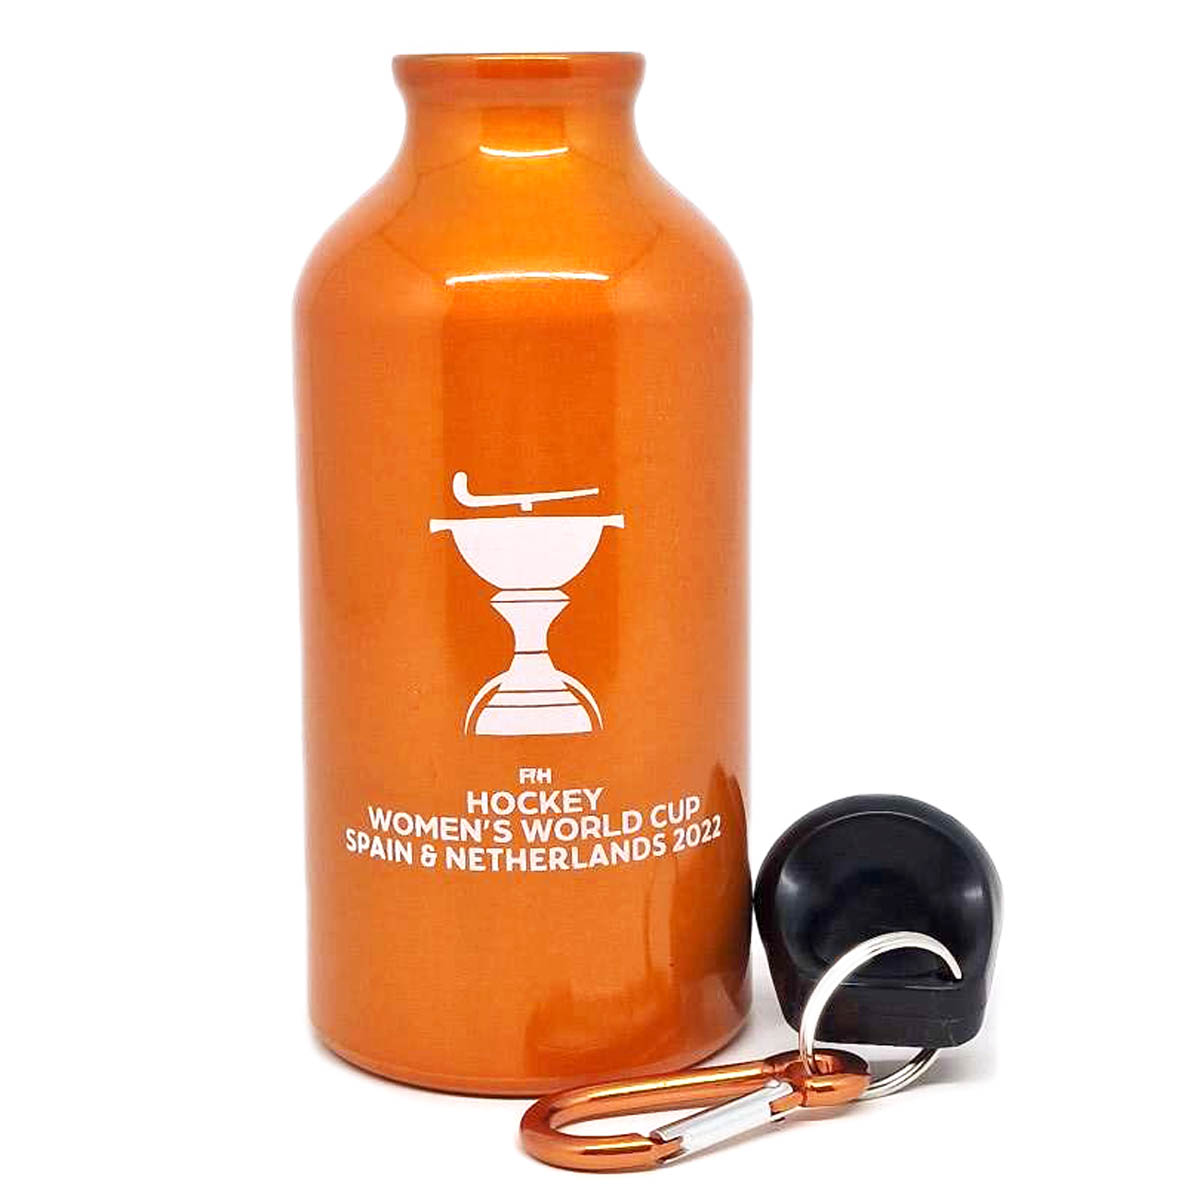 Metall Drinking Bottle with Twist Cap and Hook, 320 ml - Orange